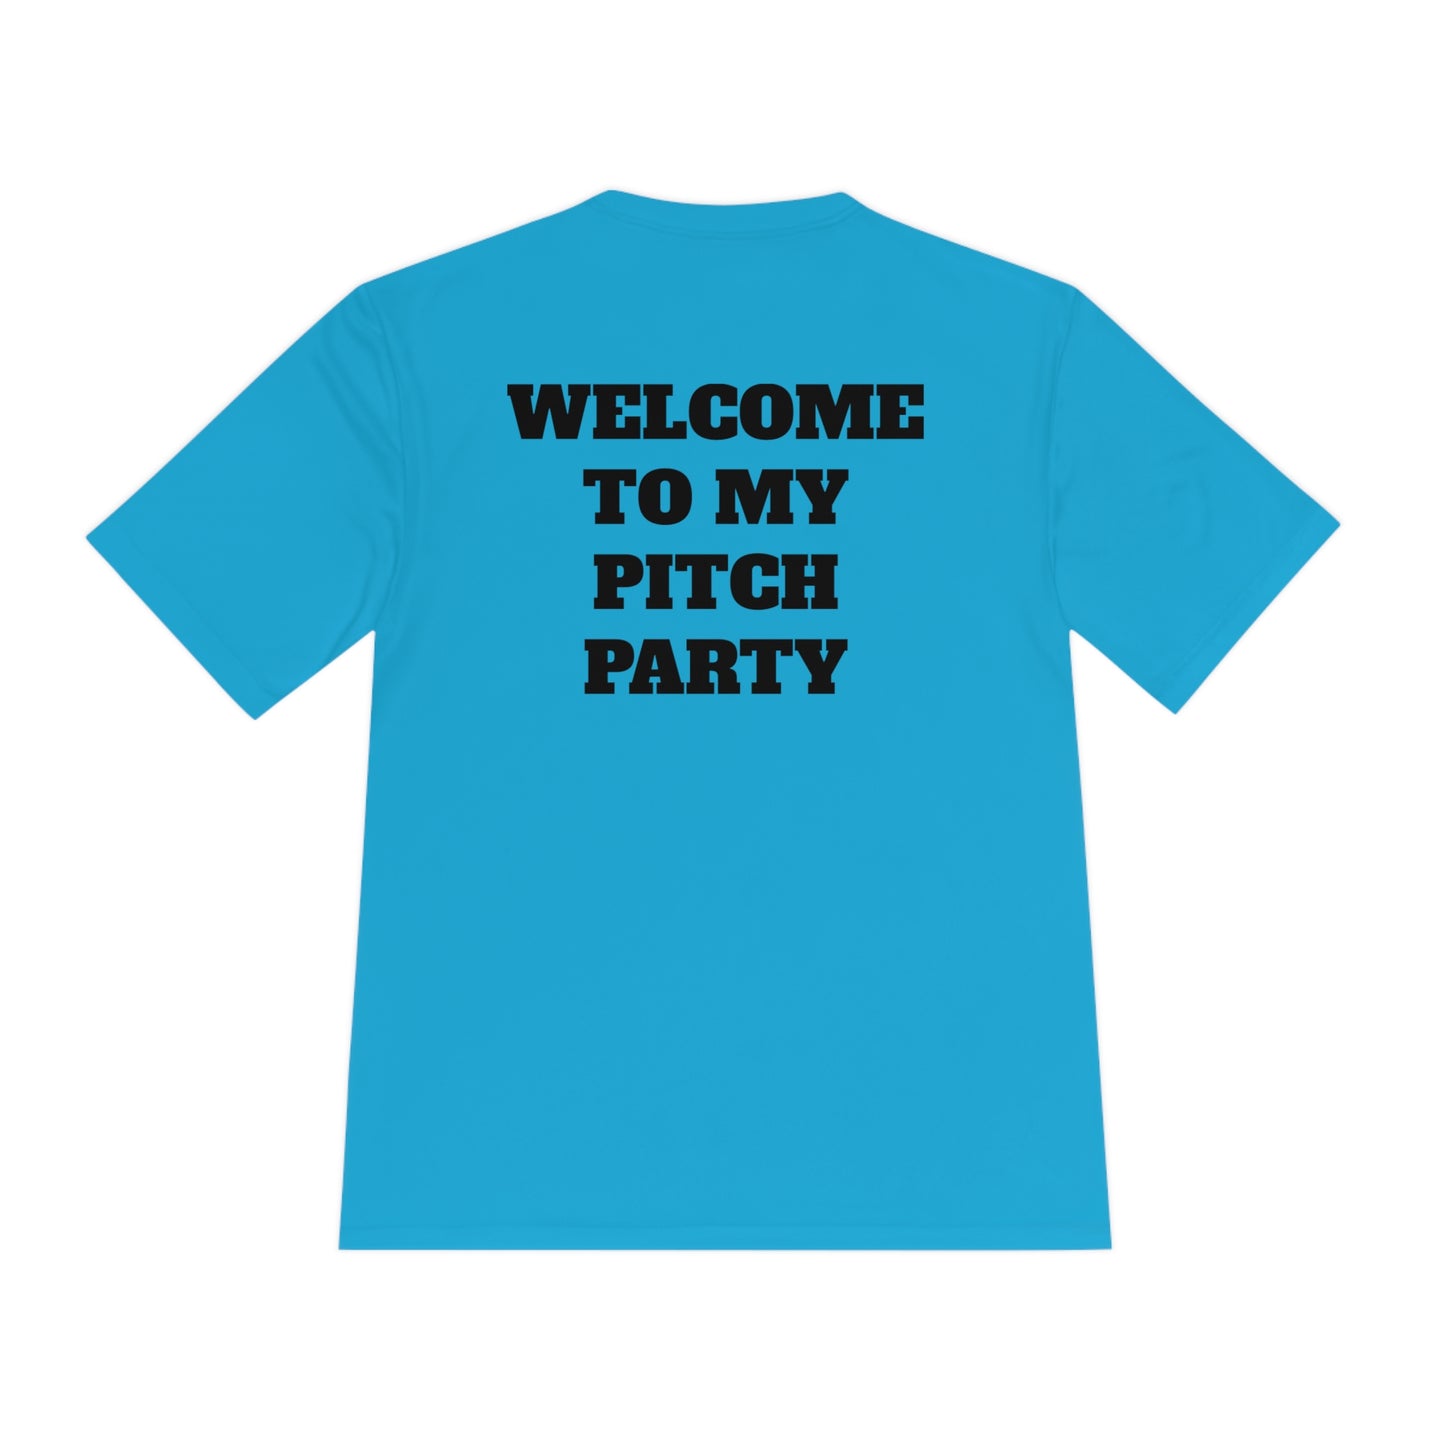 WELCOME TO MY PITCH PARTY Athletic T-Shirt (Unisex)